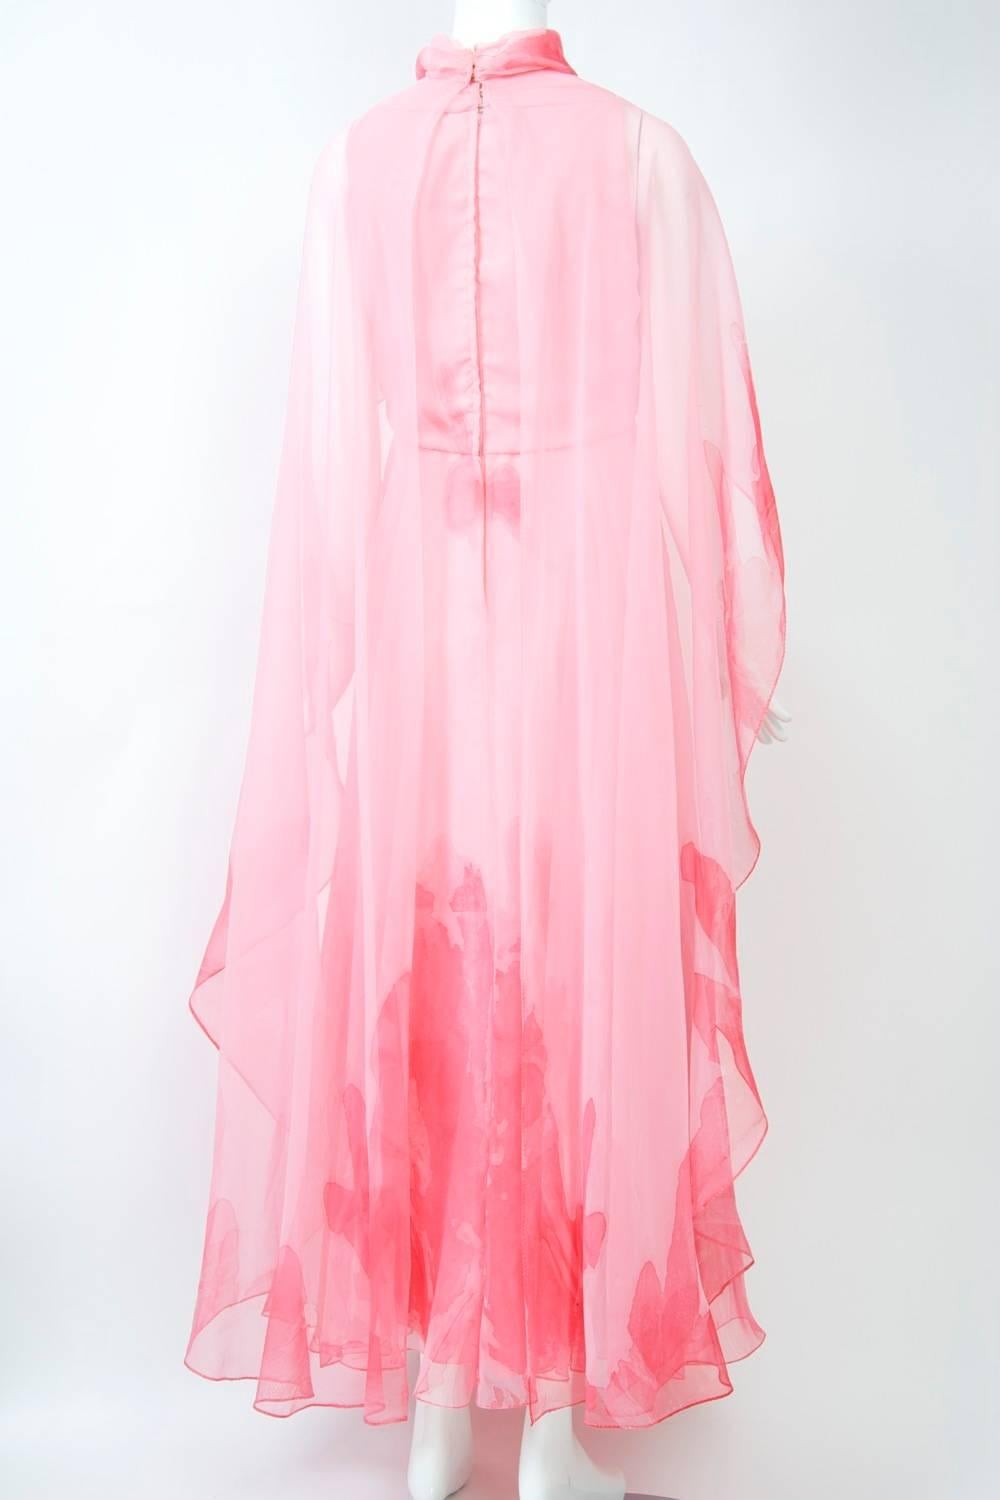 Pink Watercolor Gown, 1970s 1